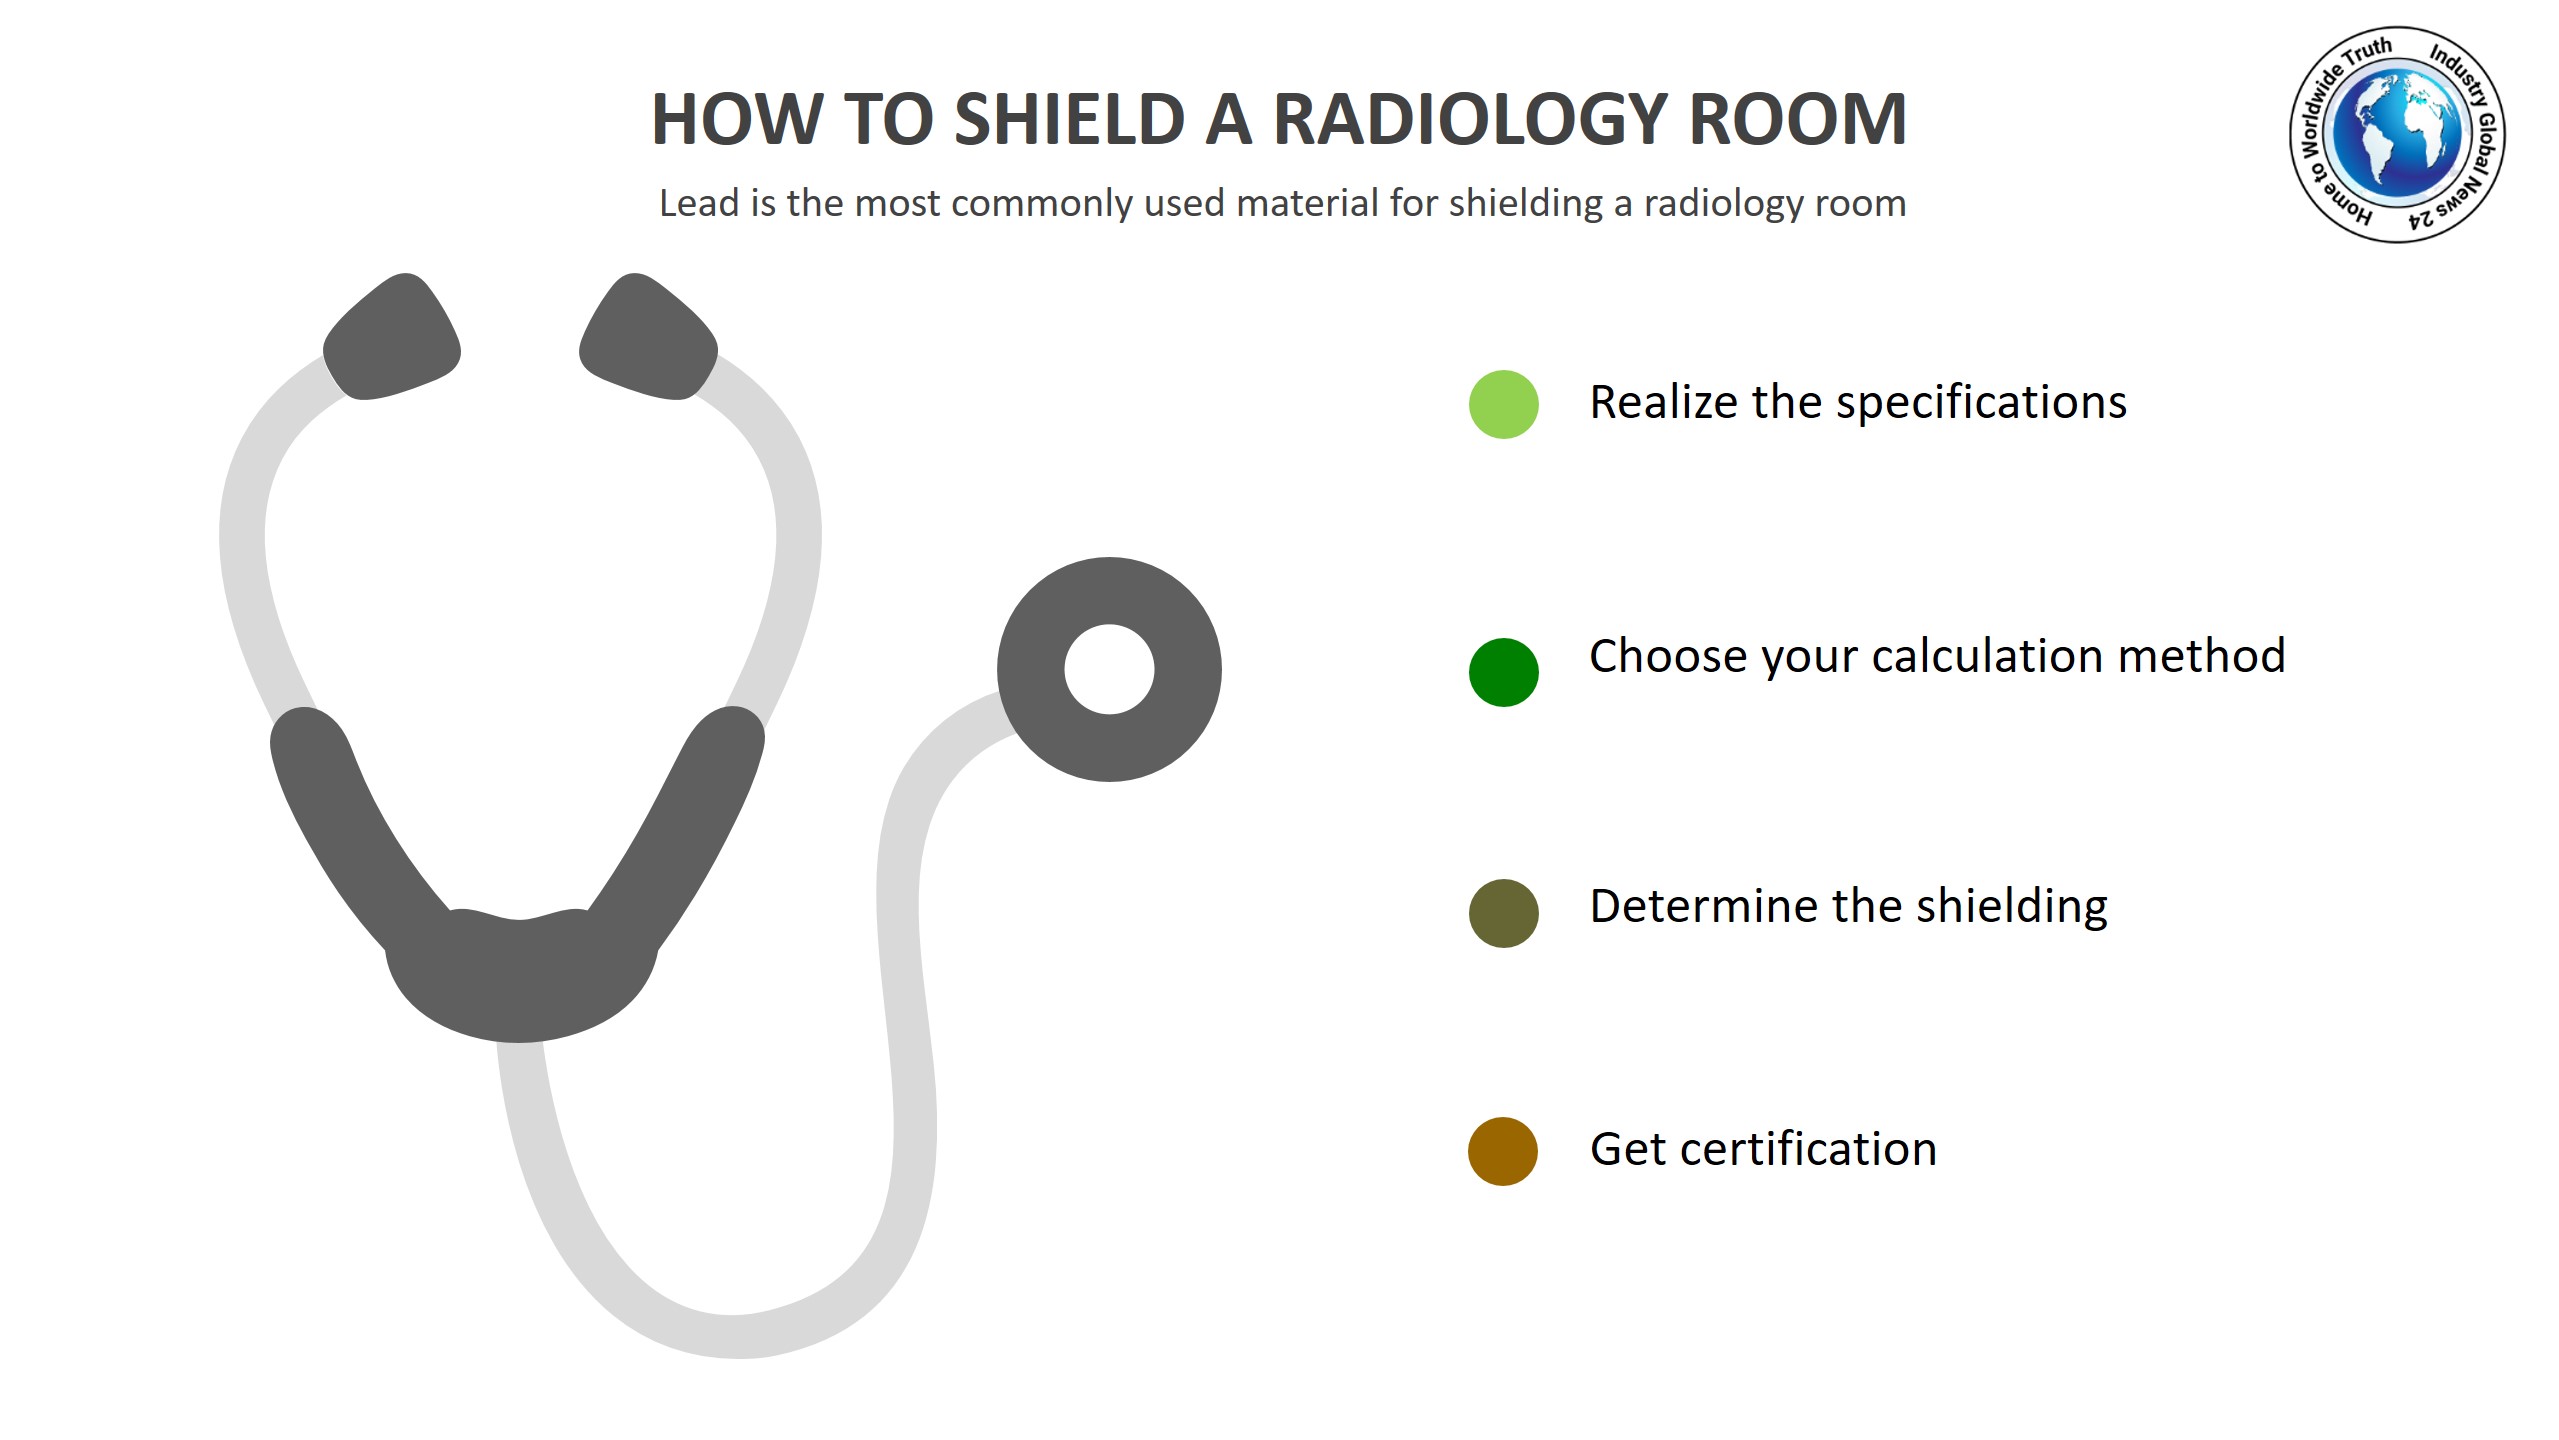 How to shield a radiology room